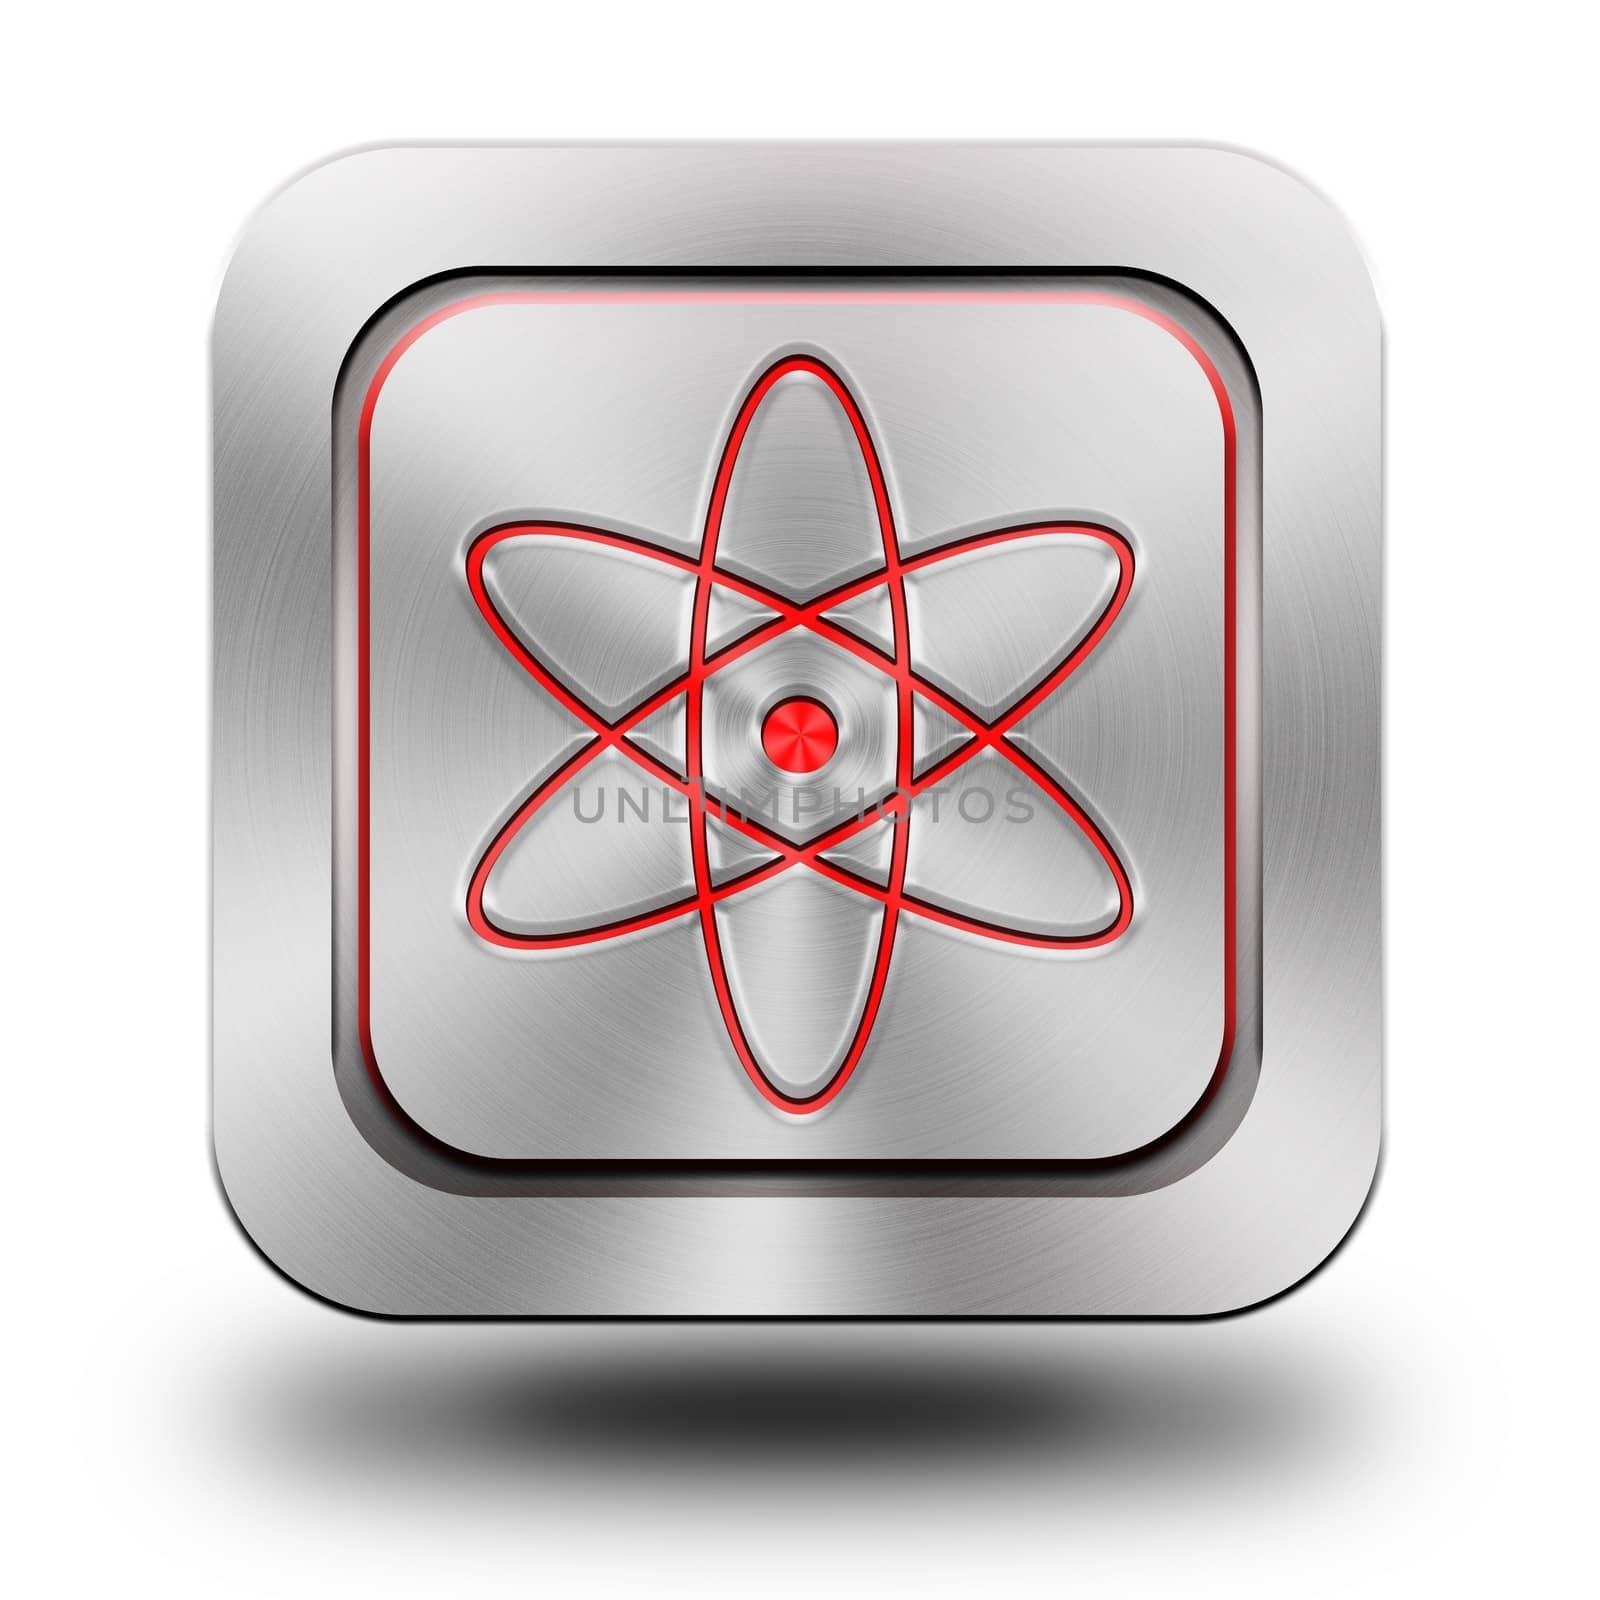 Nuclear , brushed aluminum or stainless steel, glossy icon, button, sign